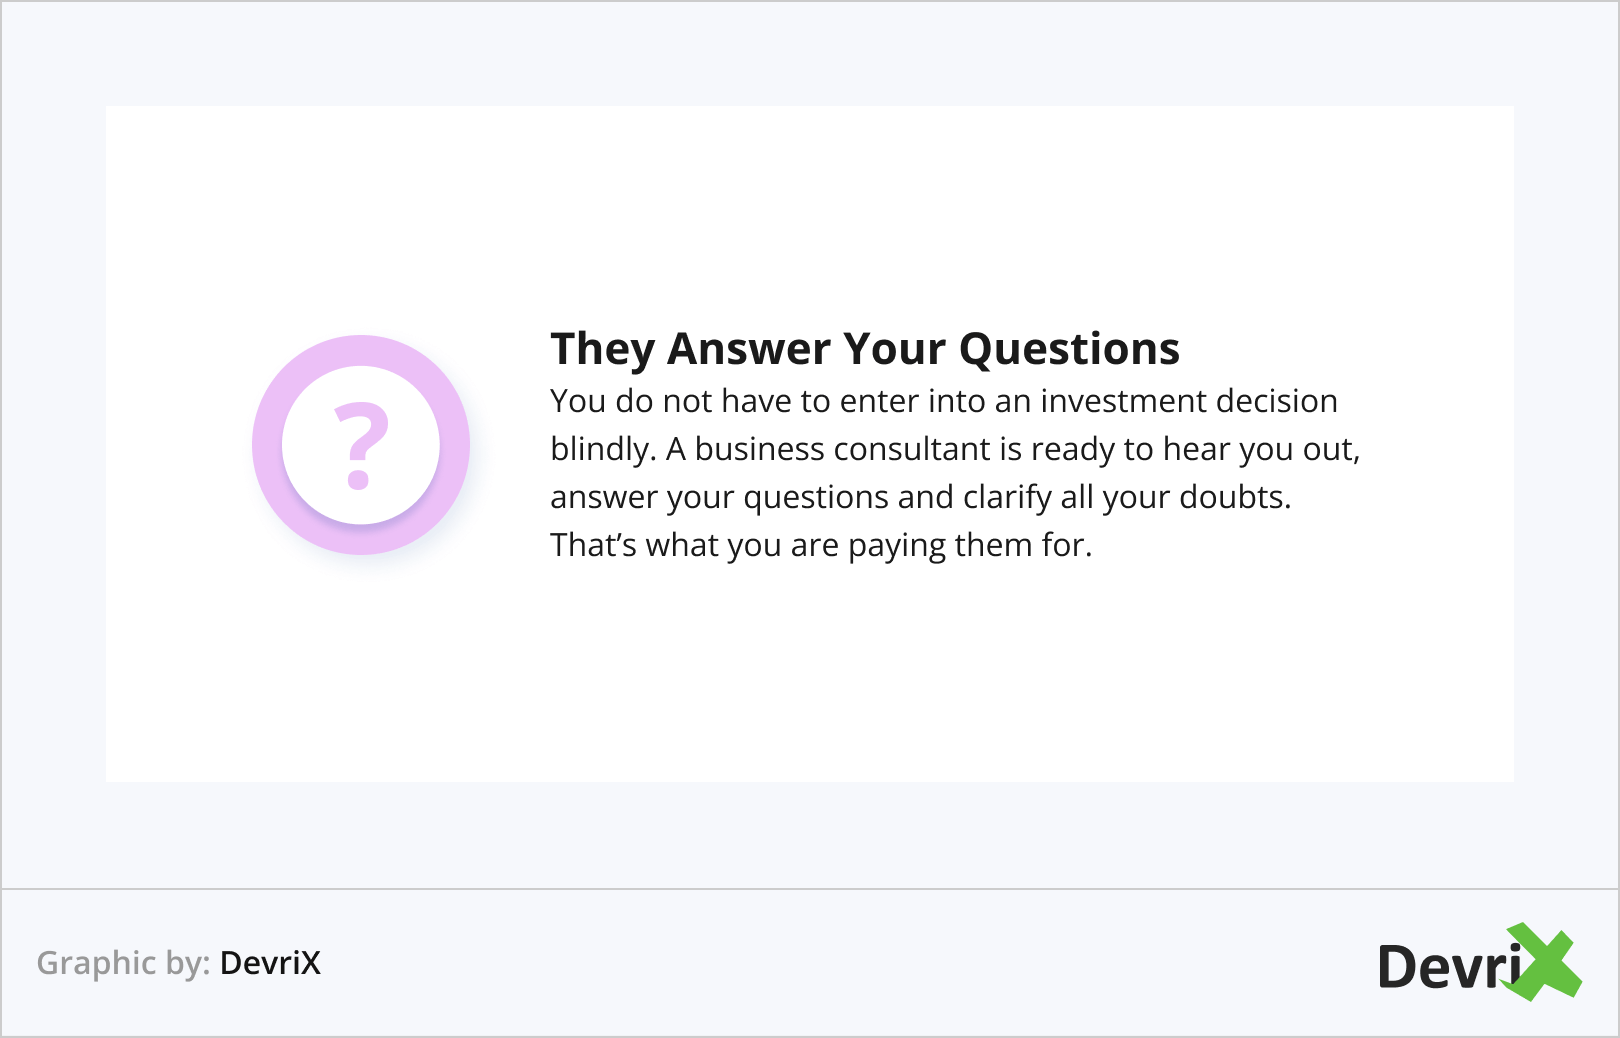 They Answer Your Questions